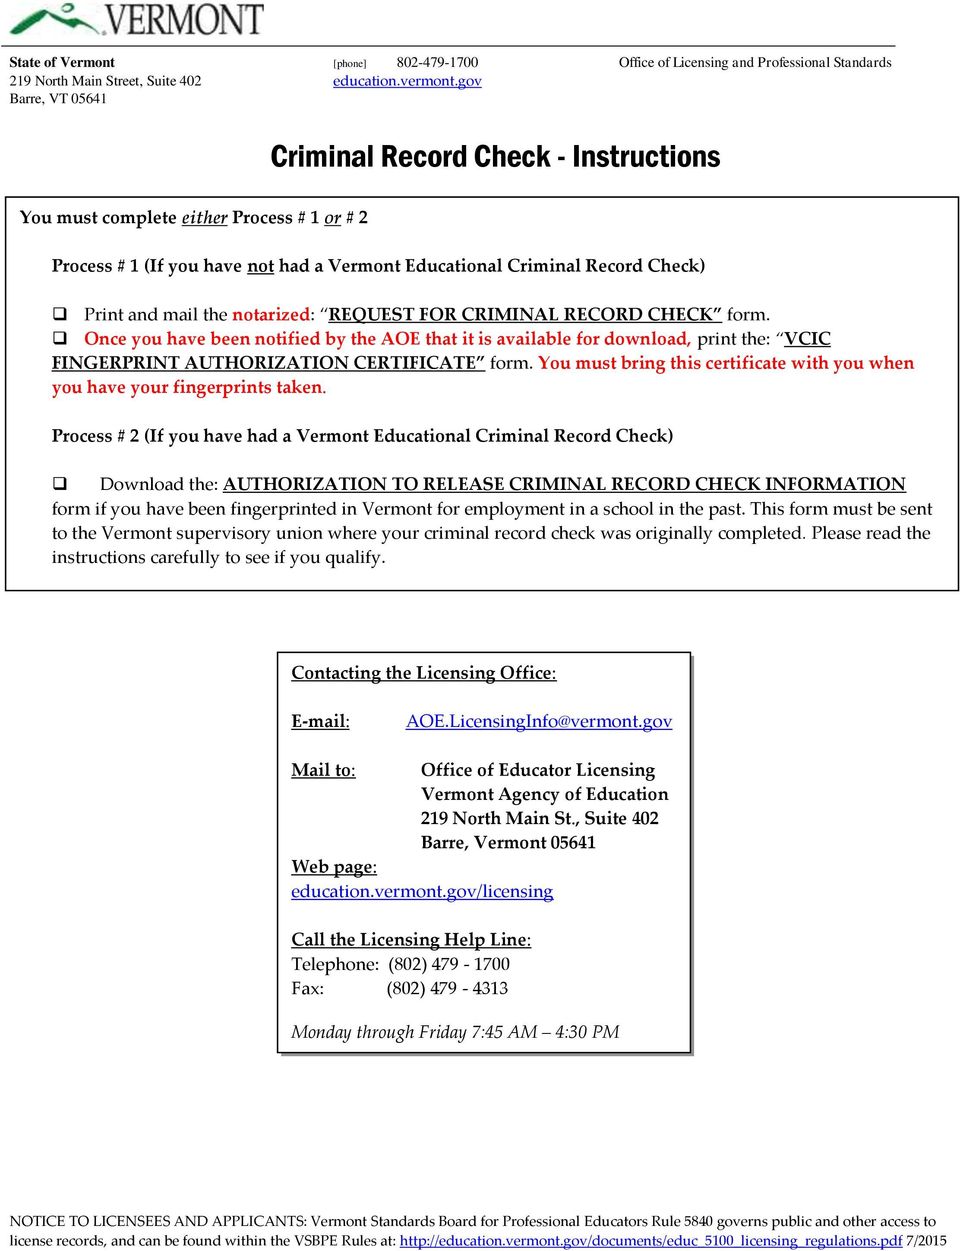 notarized: REQUEST FOR CRIMINAL RECORD CHECK form. Once you have been notified by the AOE that it is available for download, print the: VCIC FINGERPRINT AUTHORIZATION CERTIFICATE form.